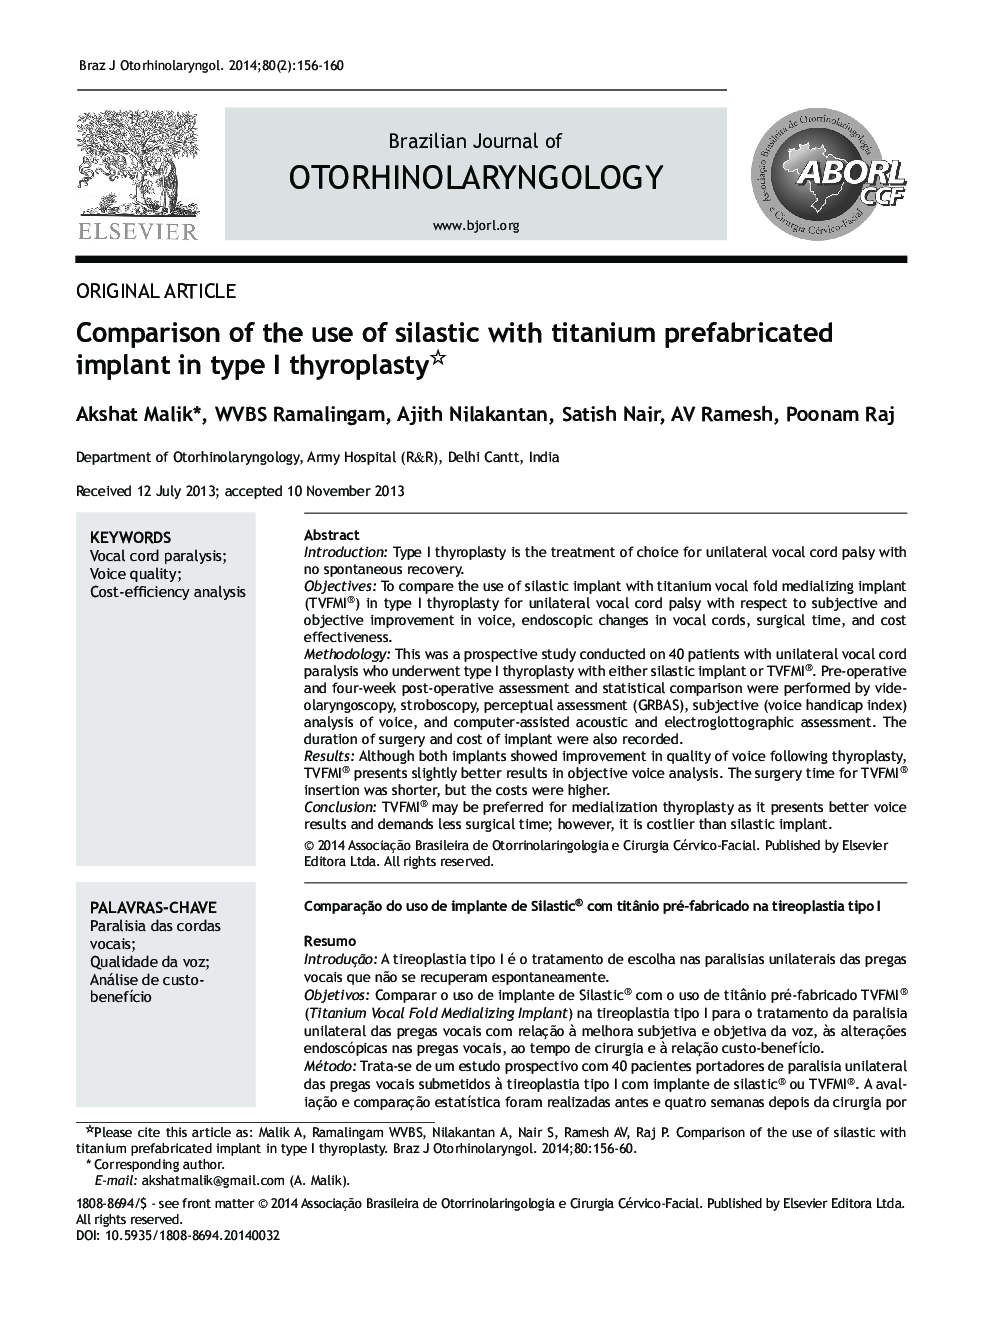 Comparison of the use of silastic with titanium prefabricated implant in type I thyroplasty✩